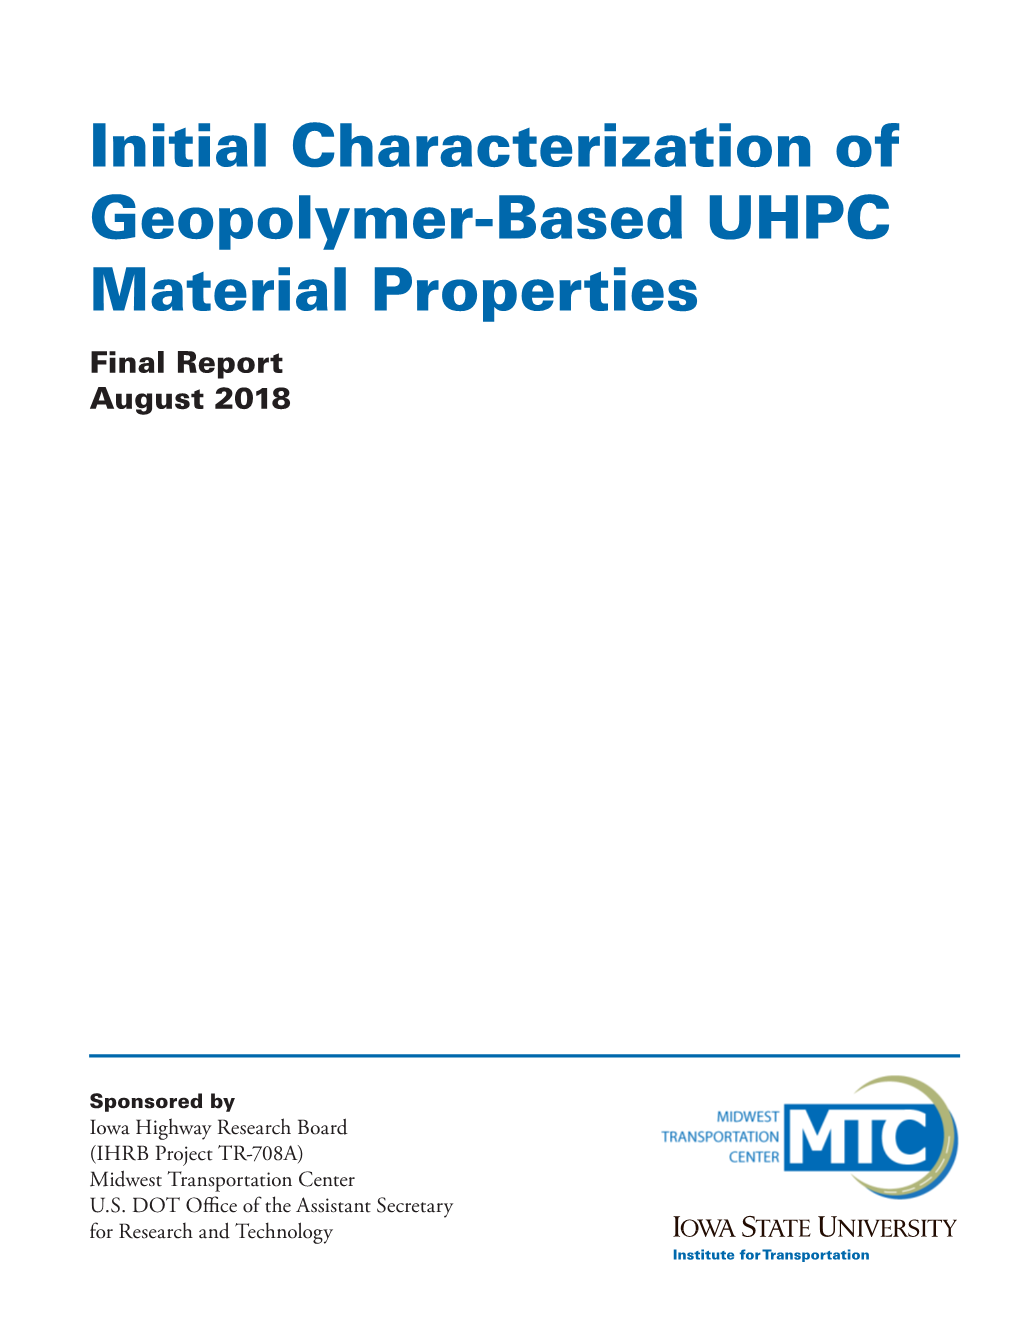 Initial Characterization of Geopolymer-Based UHPC Material Properties Final Report August 2018